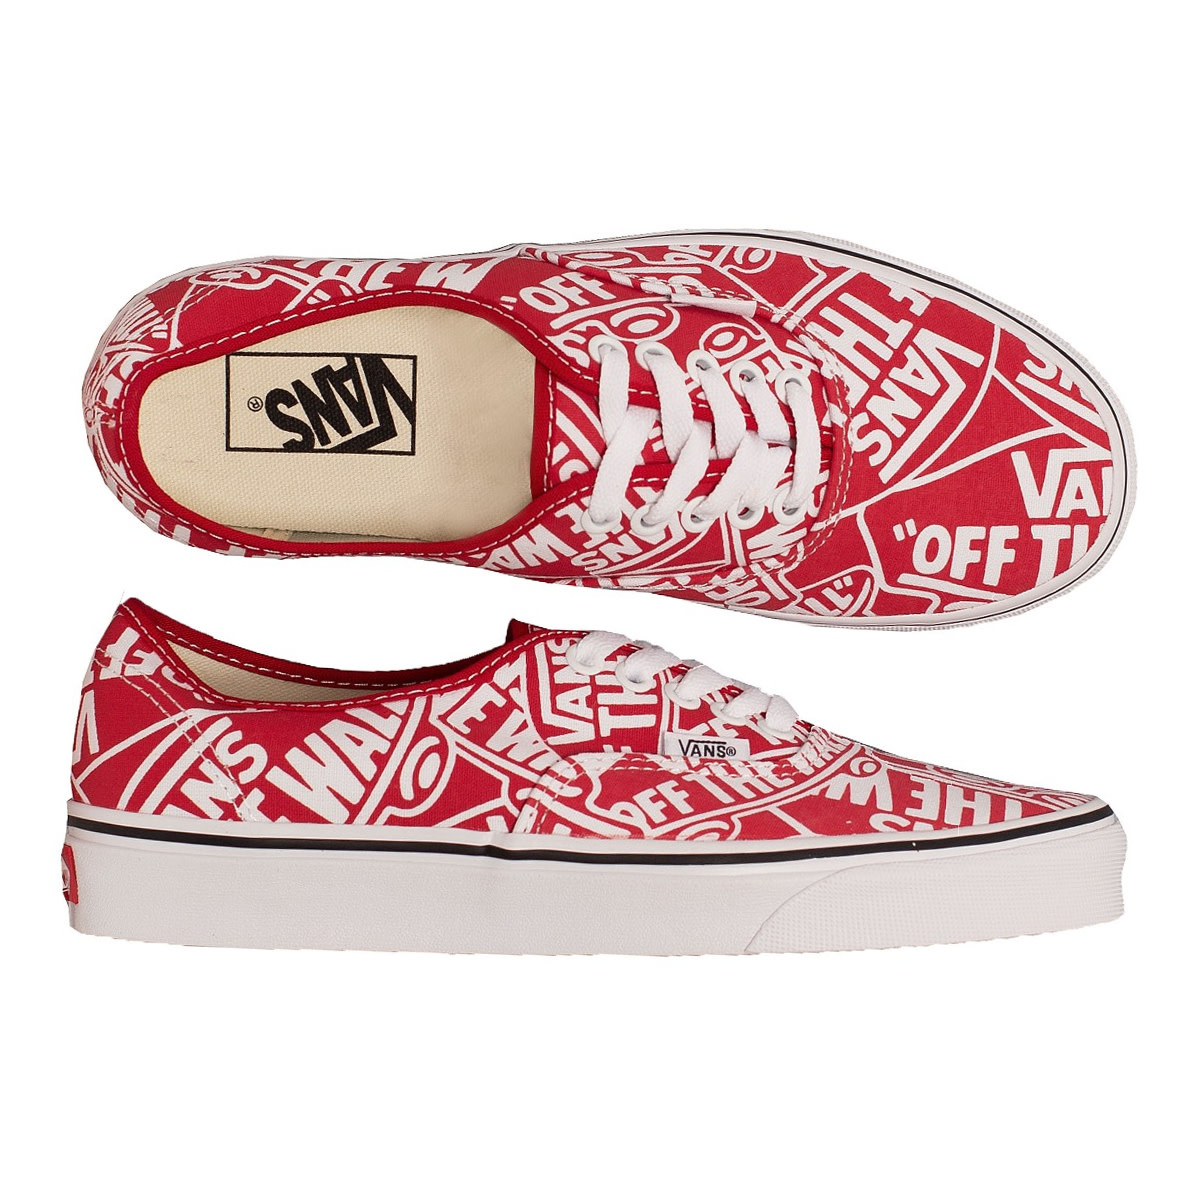 red vans with logo